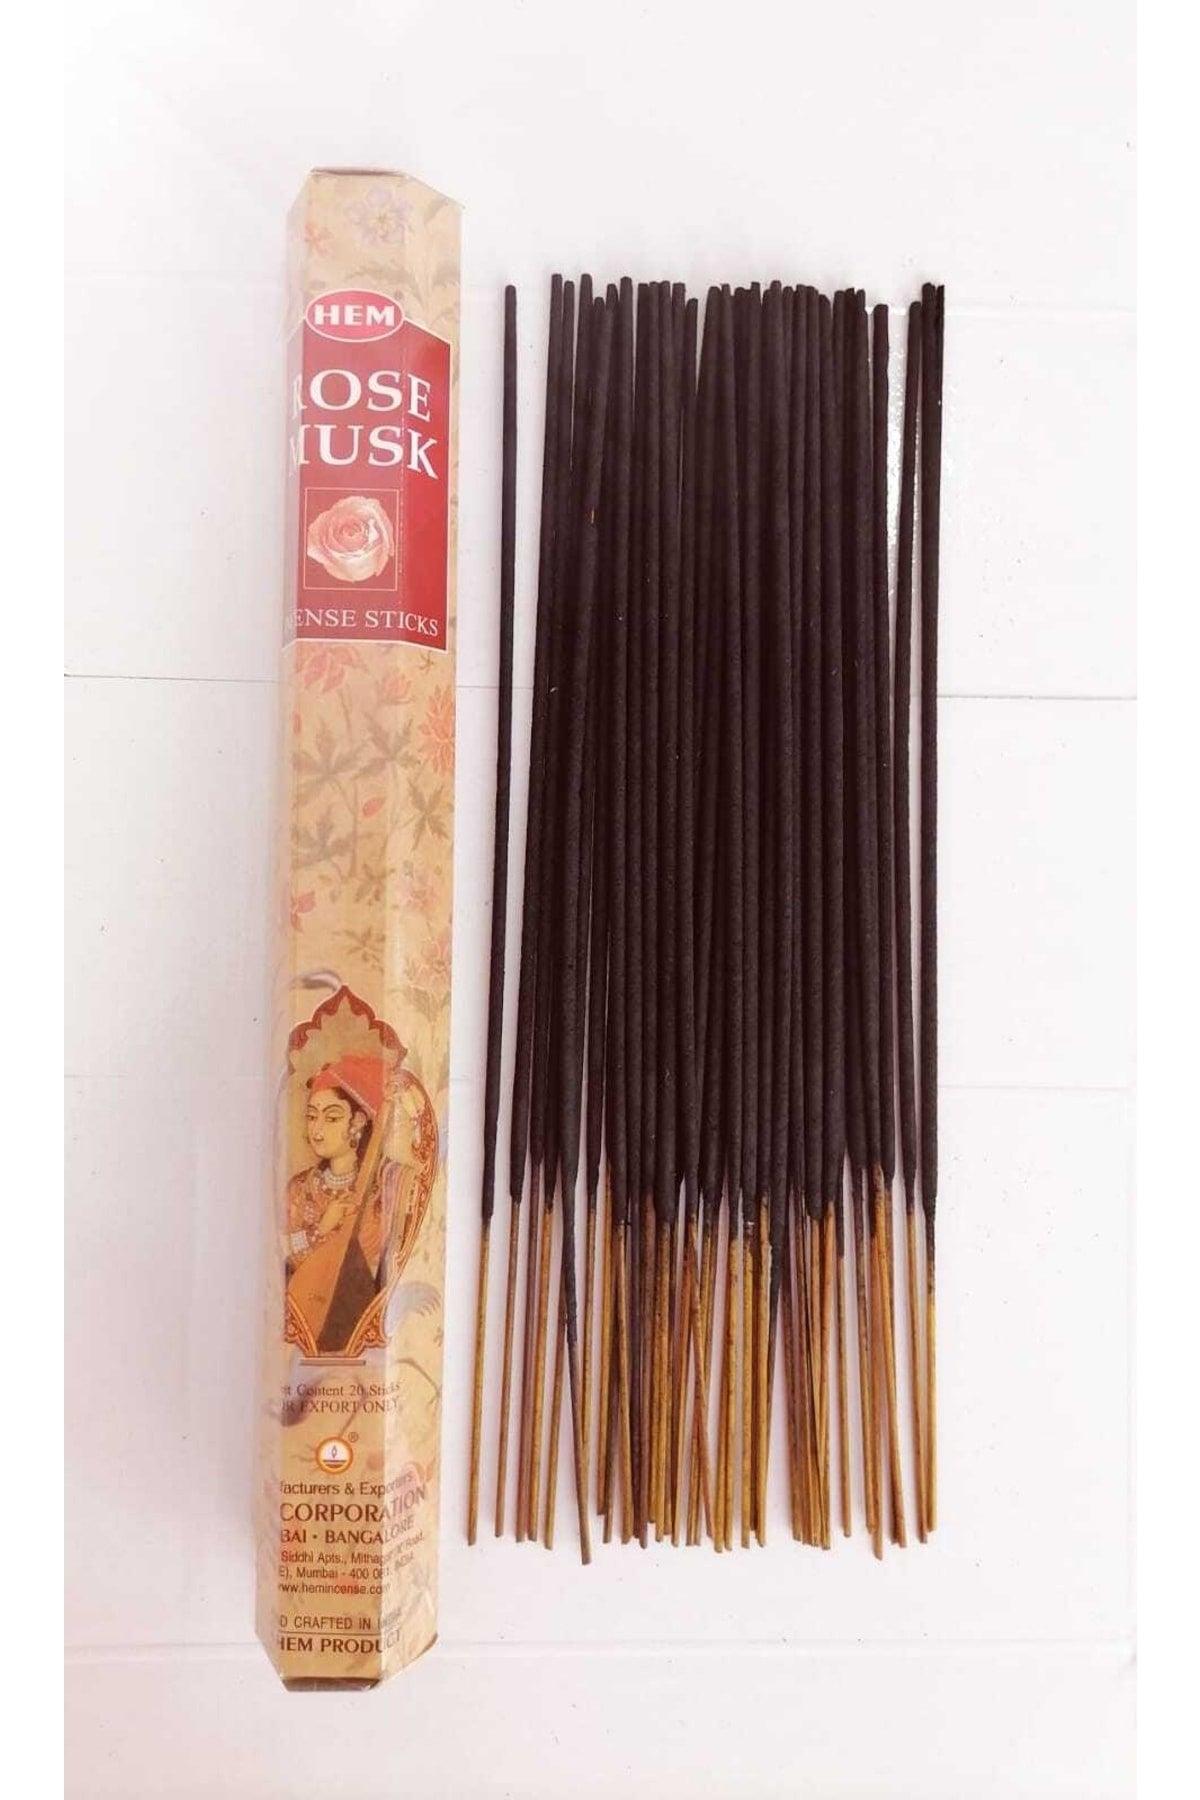 Rose Flavored Musk Scented 1 Box Stick Incense 20